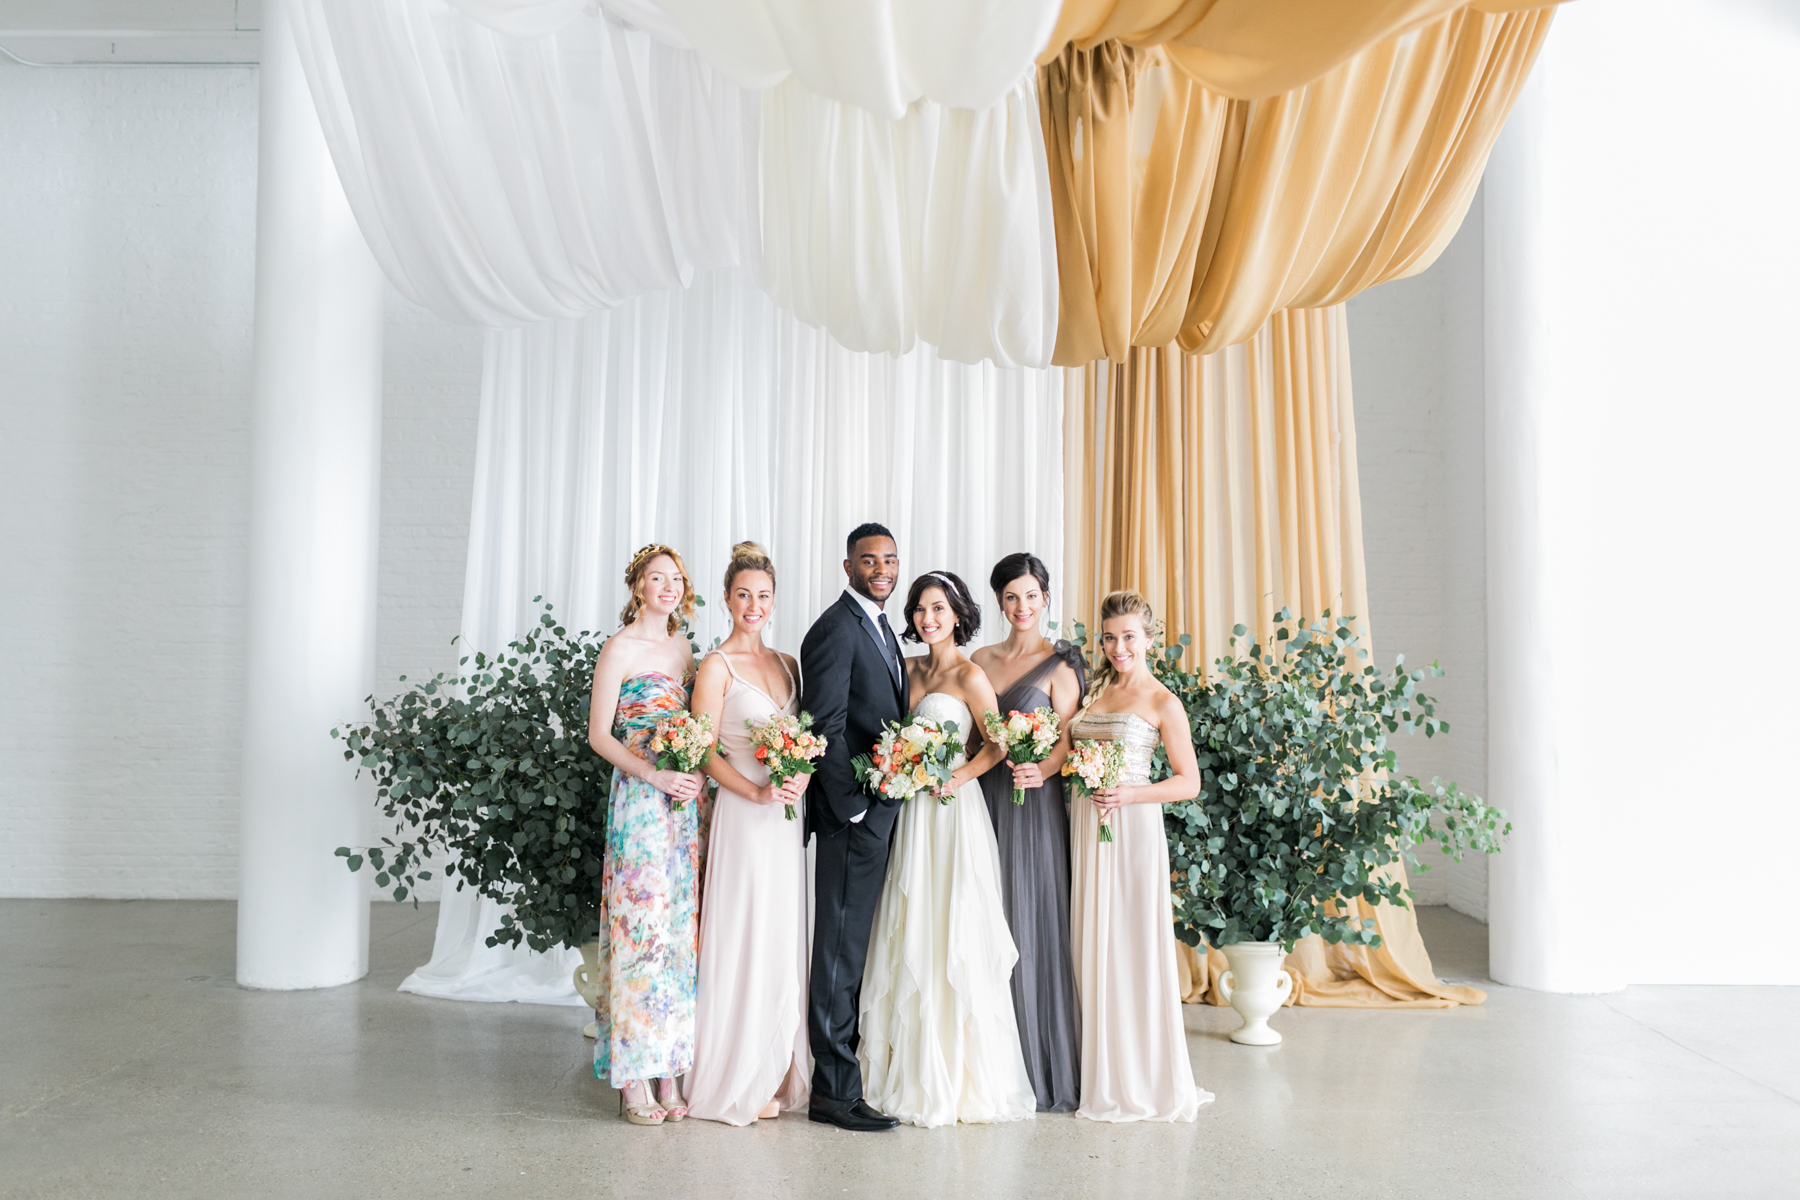 Ceiling Draping as Ceremony Altar